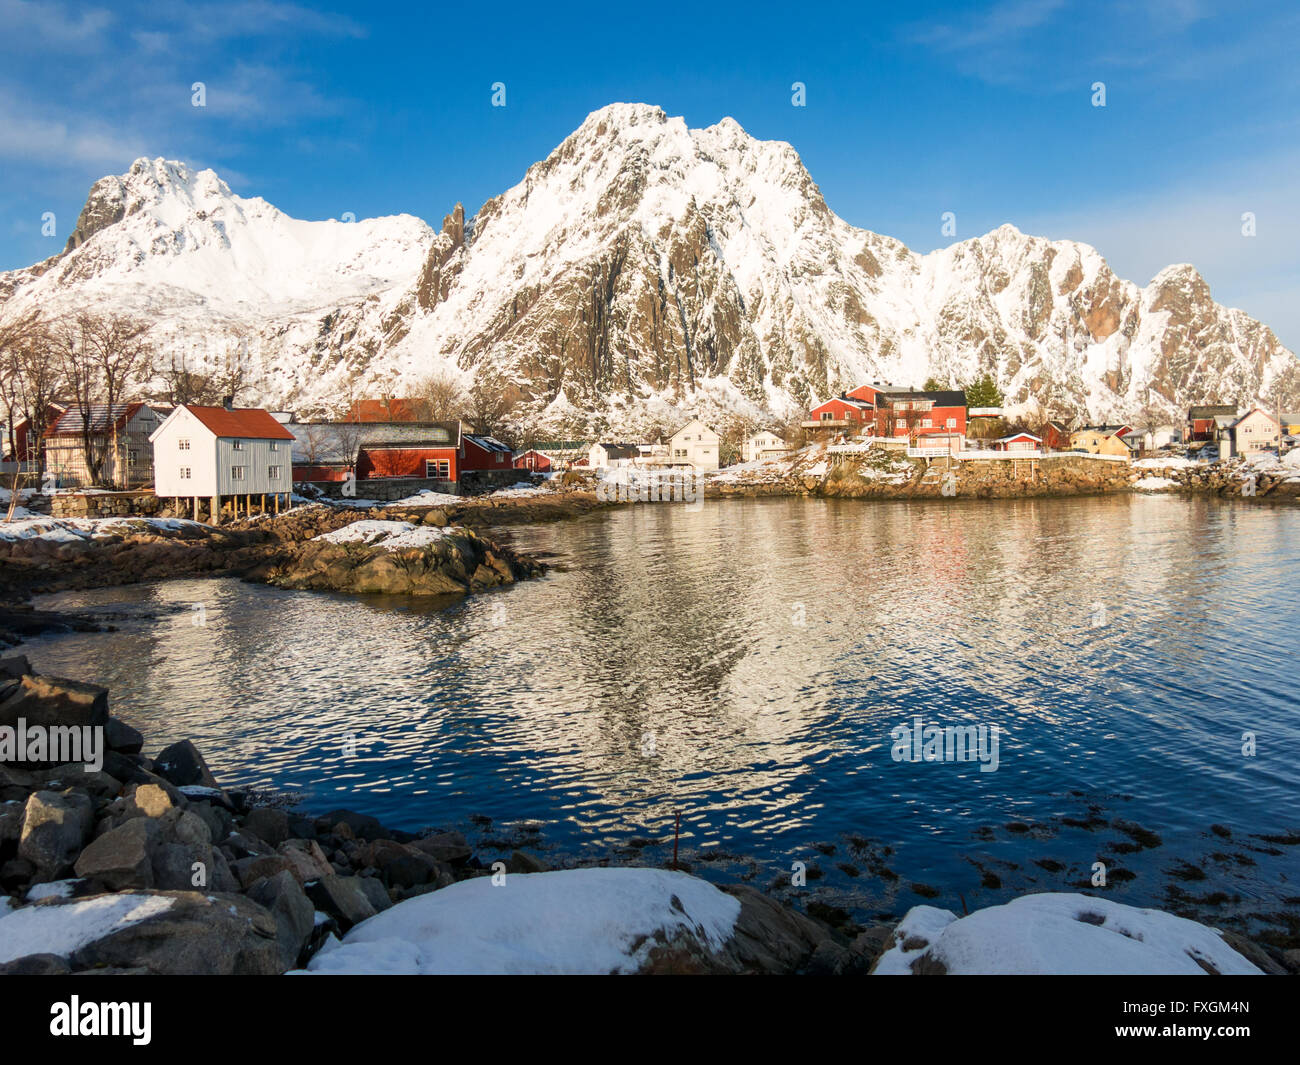 Rorbu cabins and houses in Svolvaer, Lofoten Islands, Norway Stock Photo